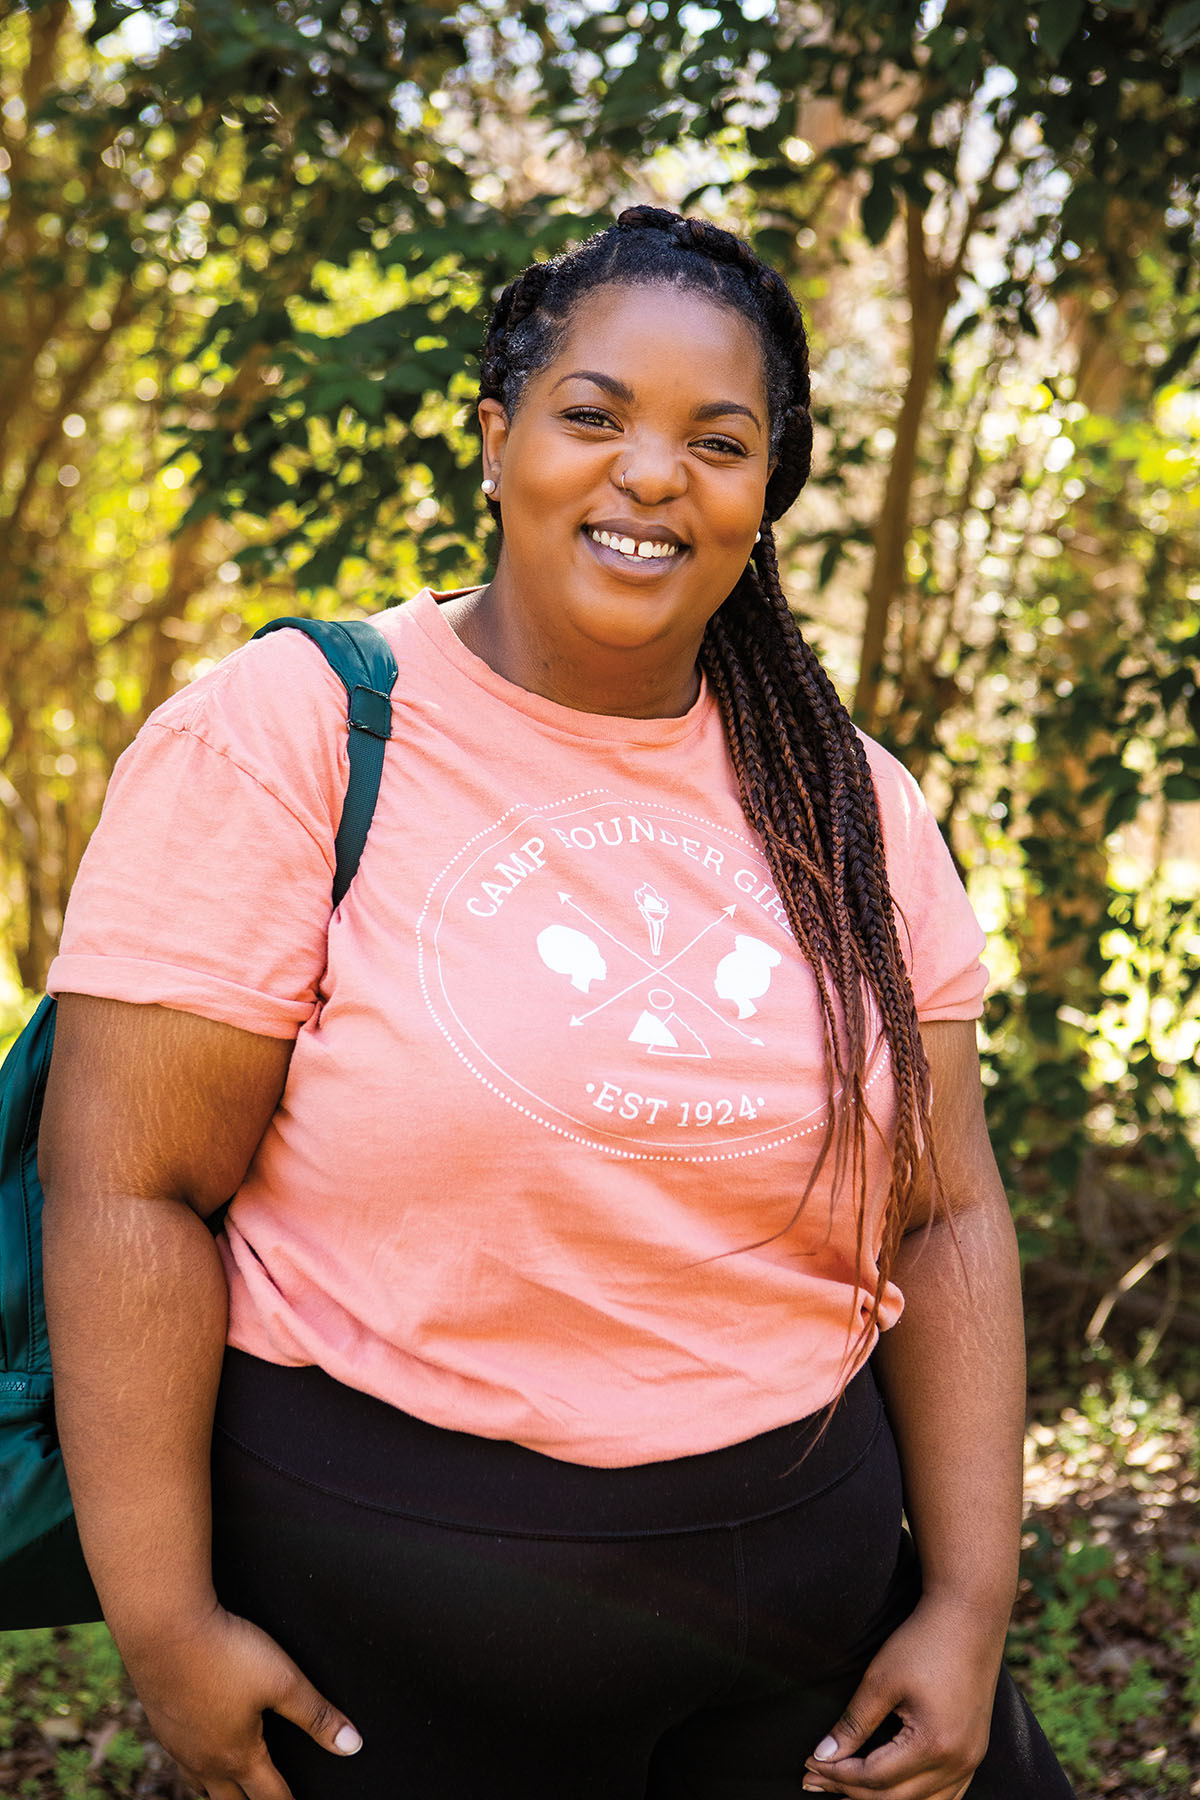 A woman in a pink t-shirt wearing a backpack stands in a tree-filled setting